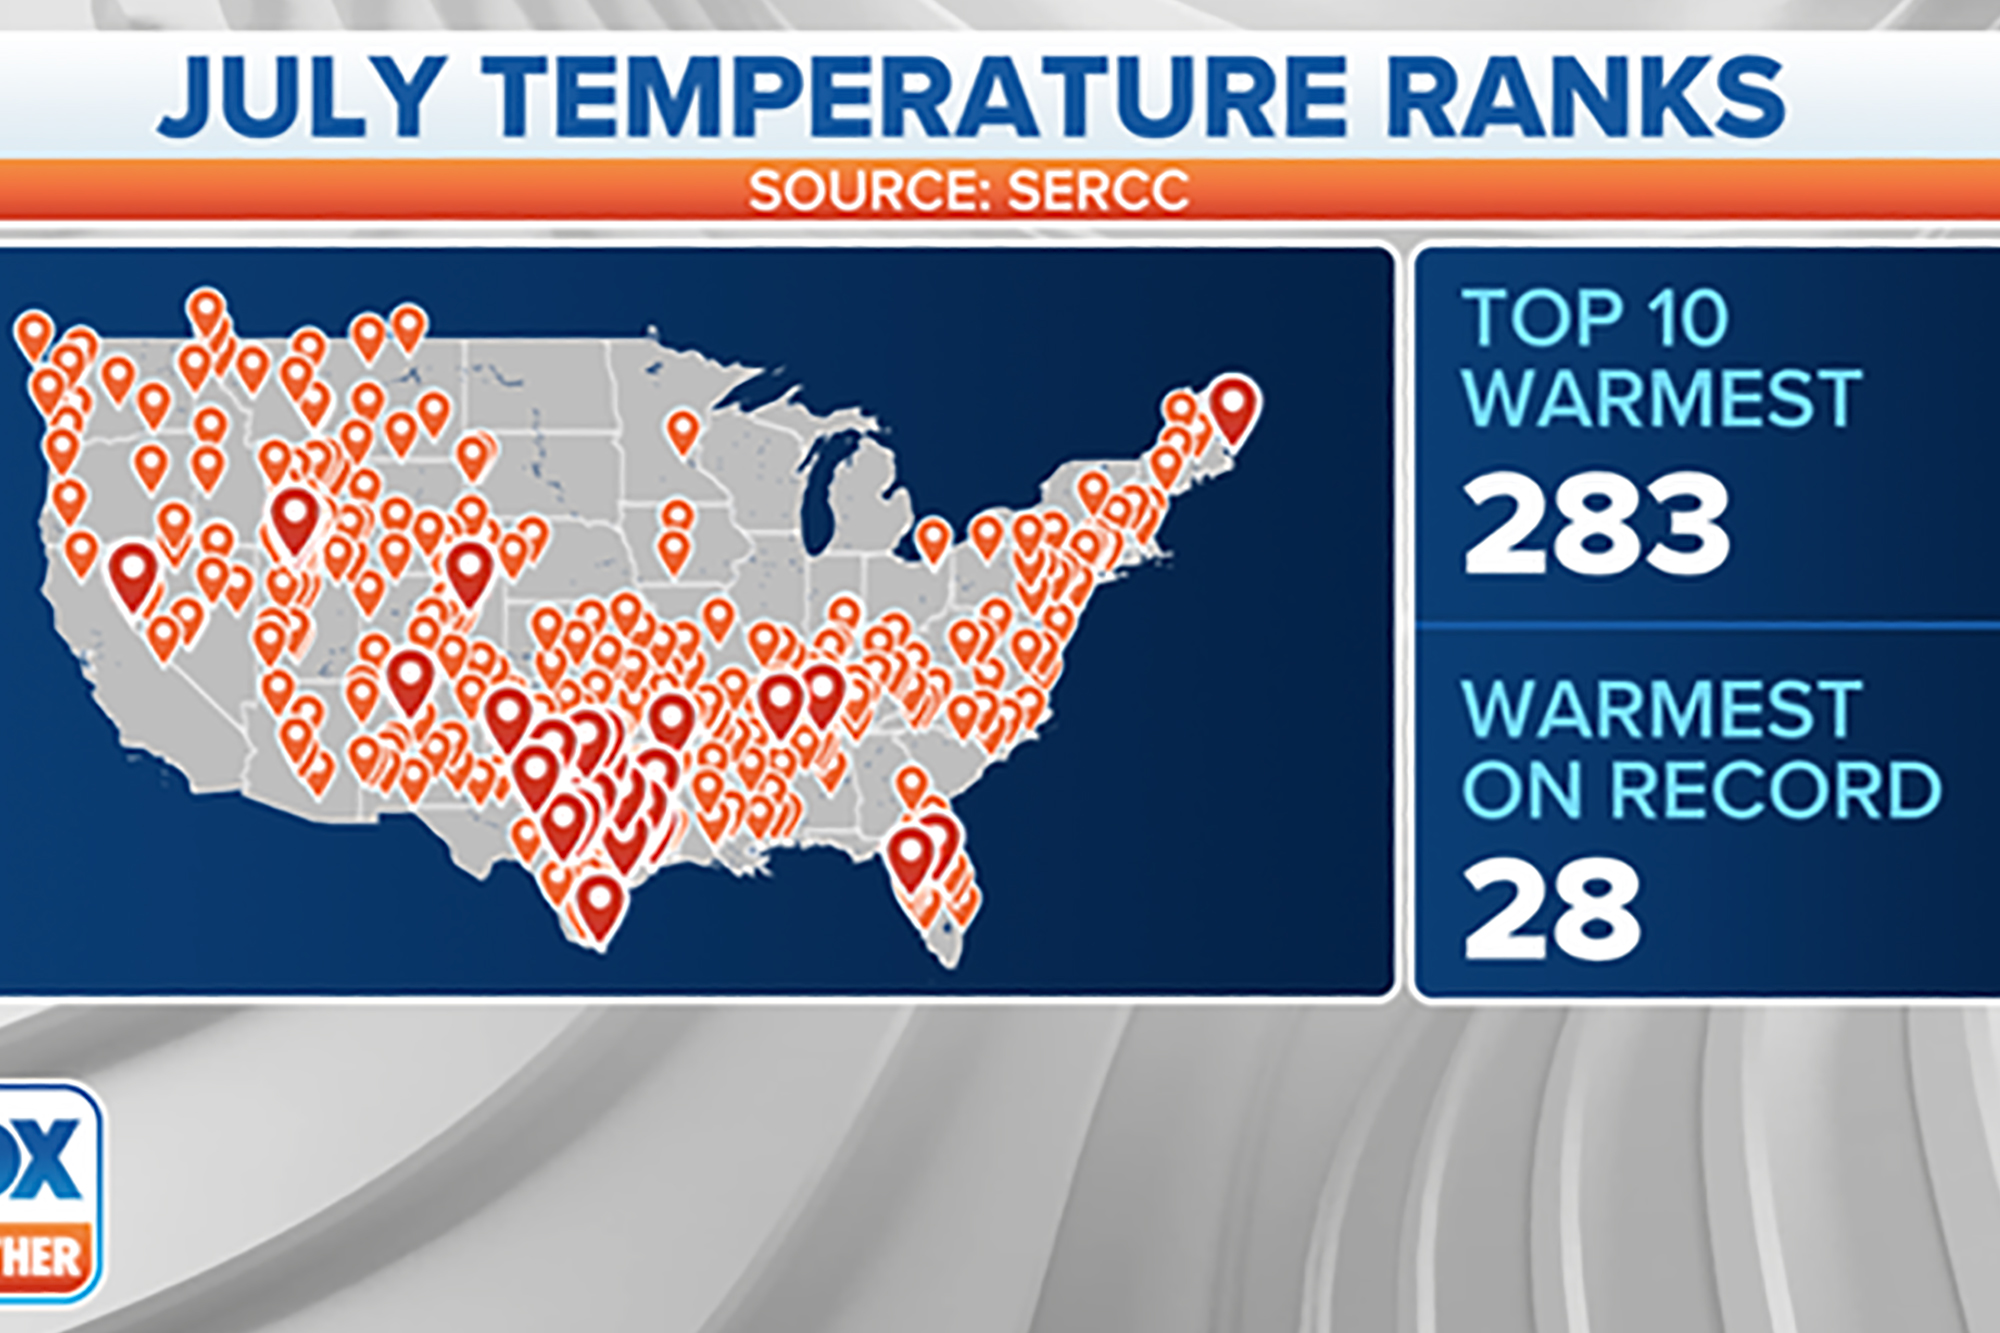 Twenty-eight cities across America recorded their hottest July temperatures.